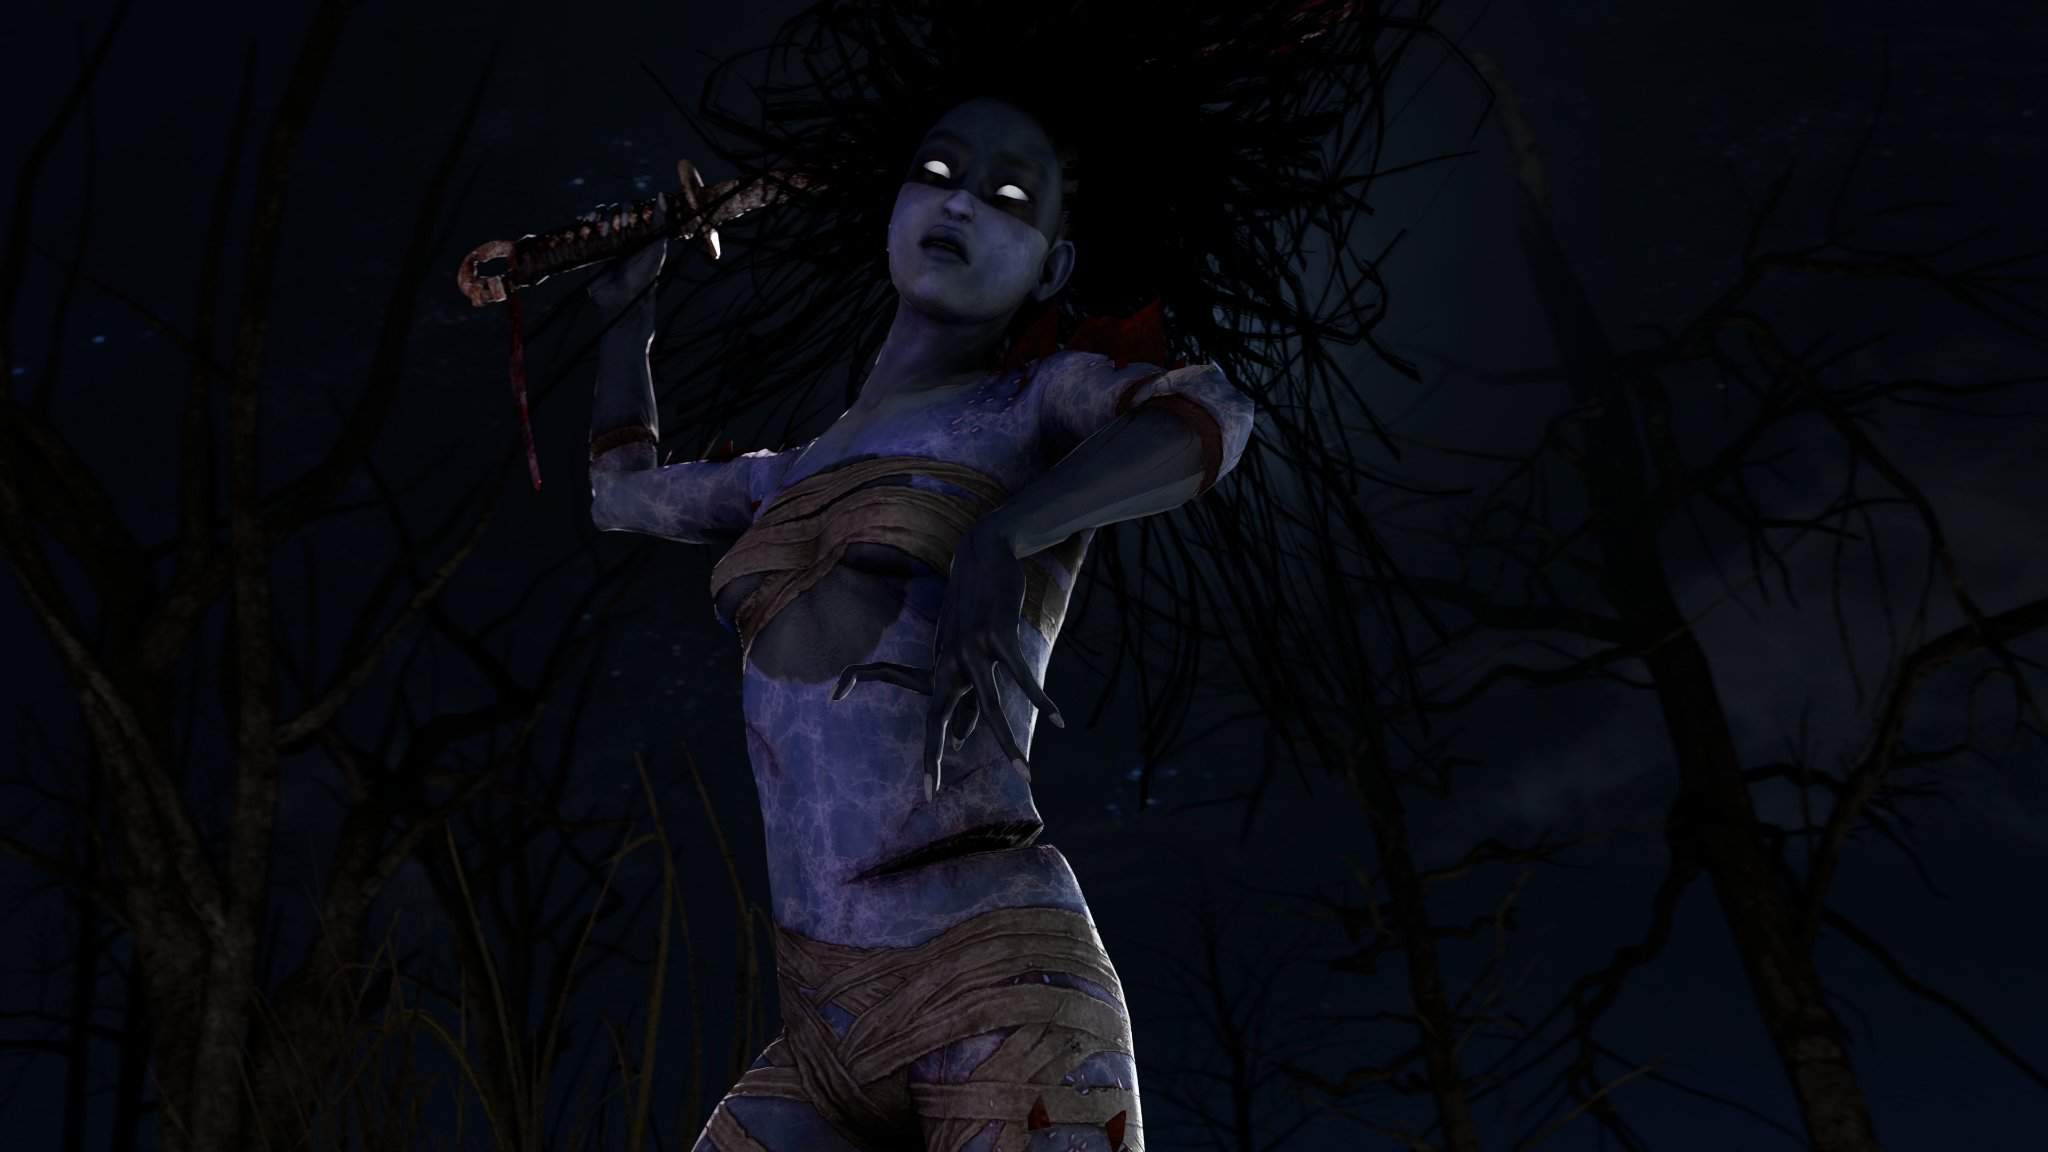 HWYB Rin Yamaoka from Dead By Daylight as a monster? : Tabletop games : r/WhatWouldYouBuild